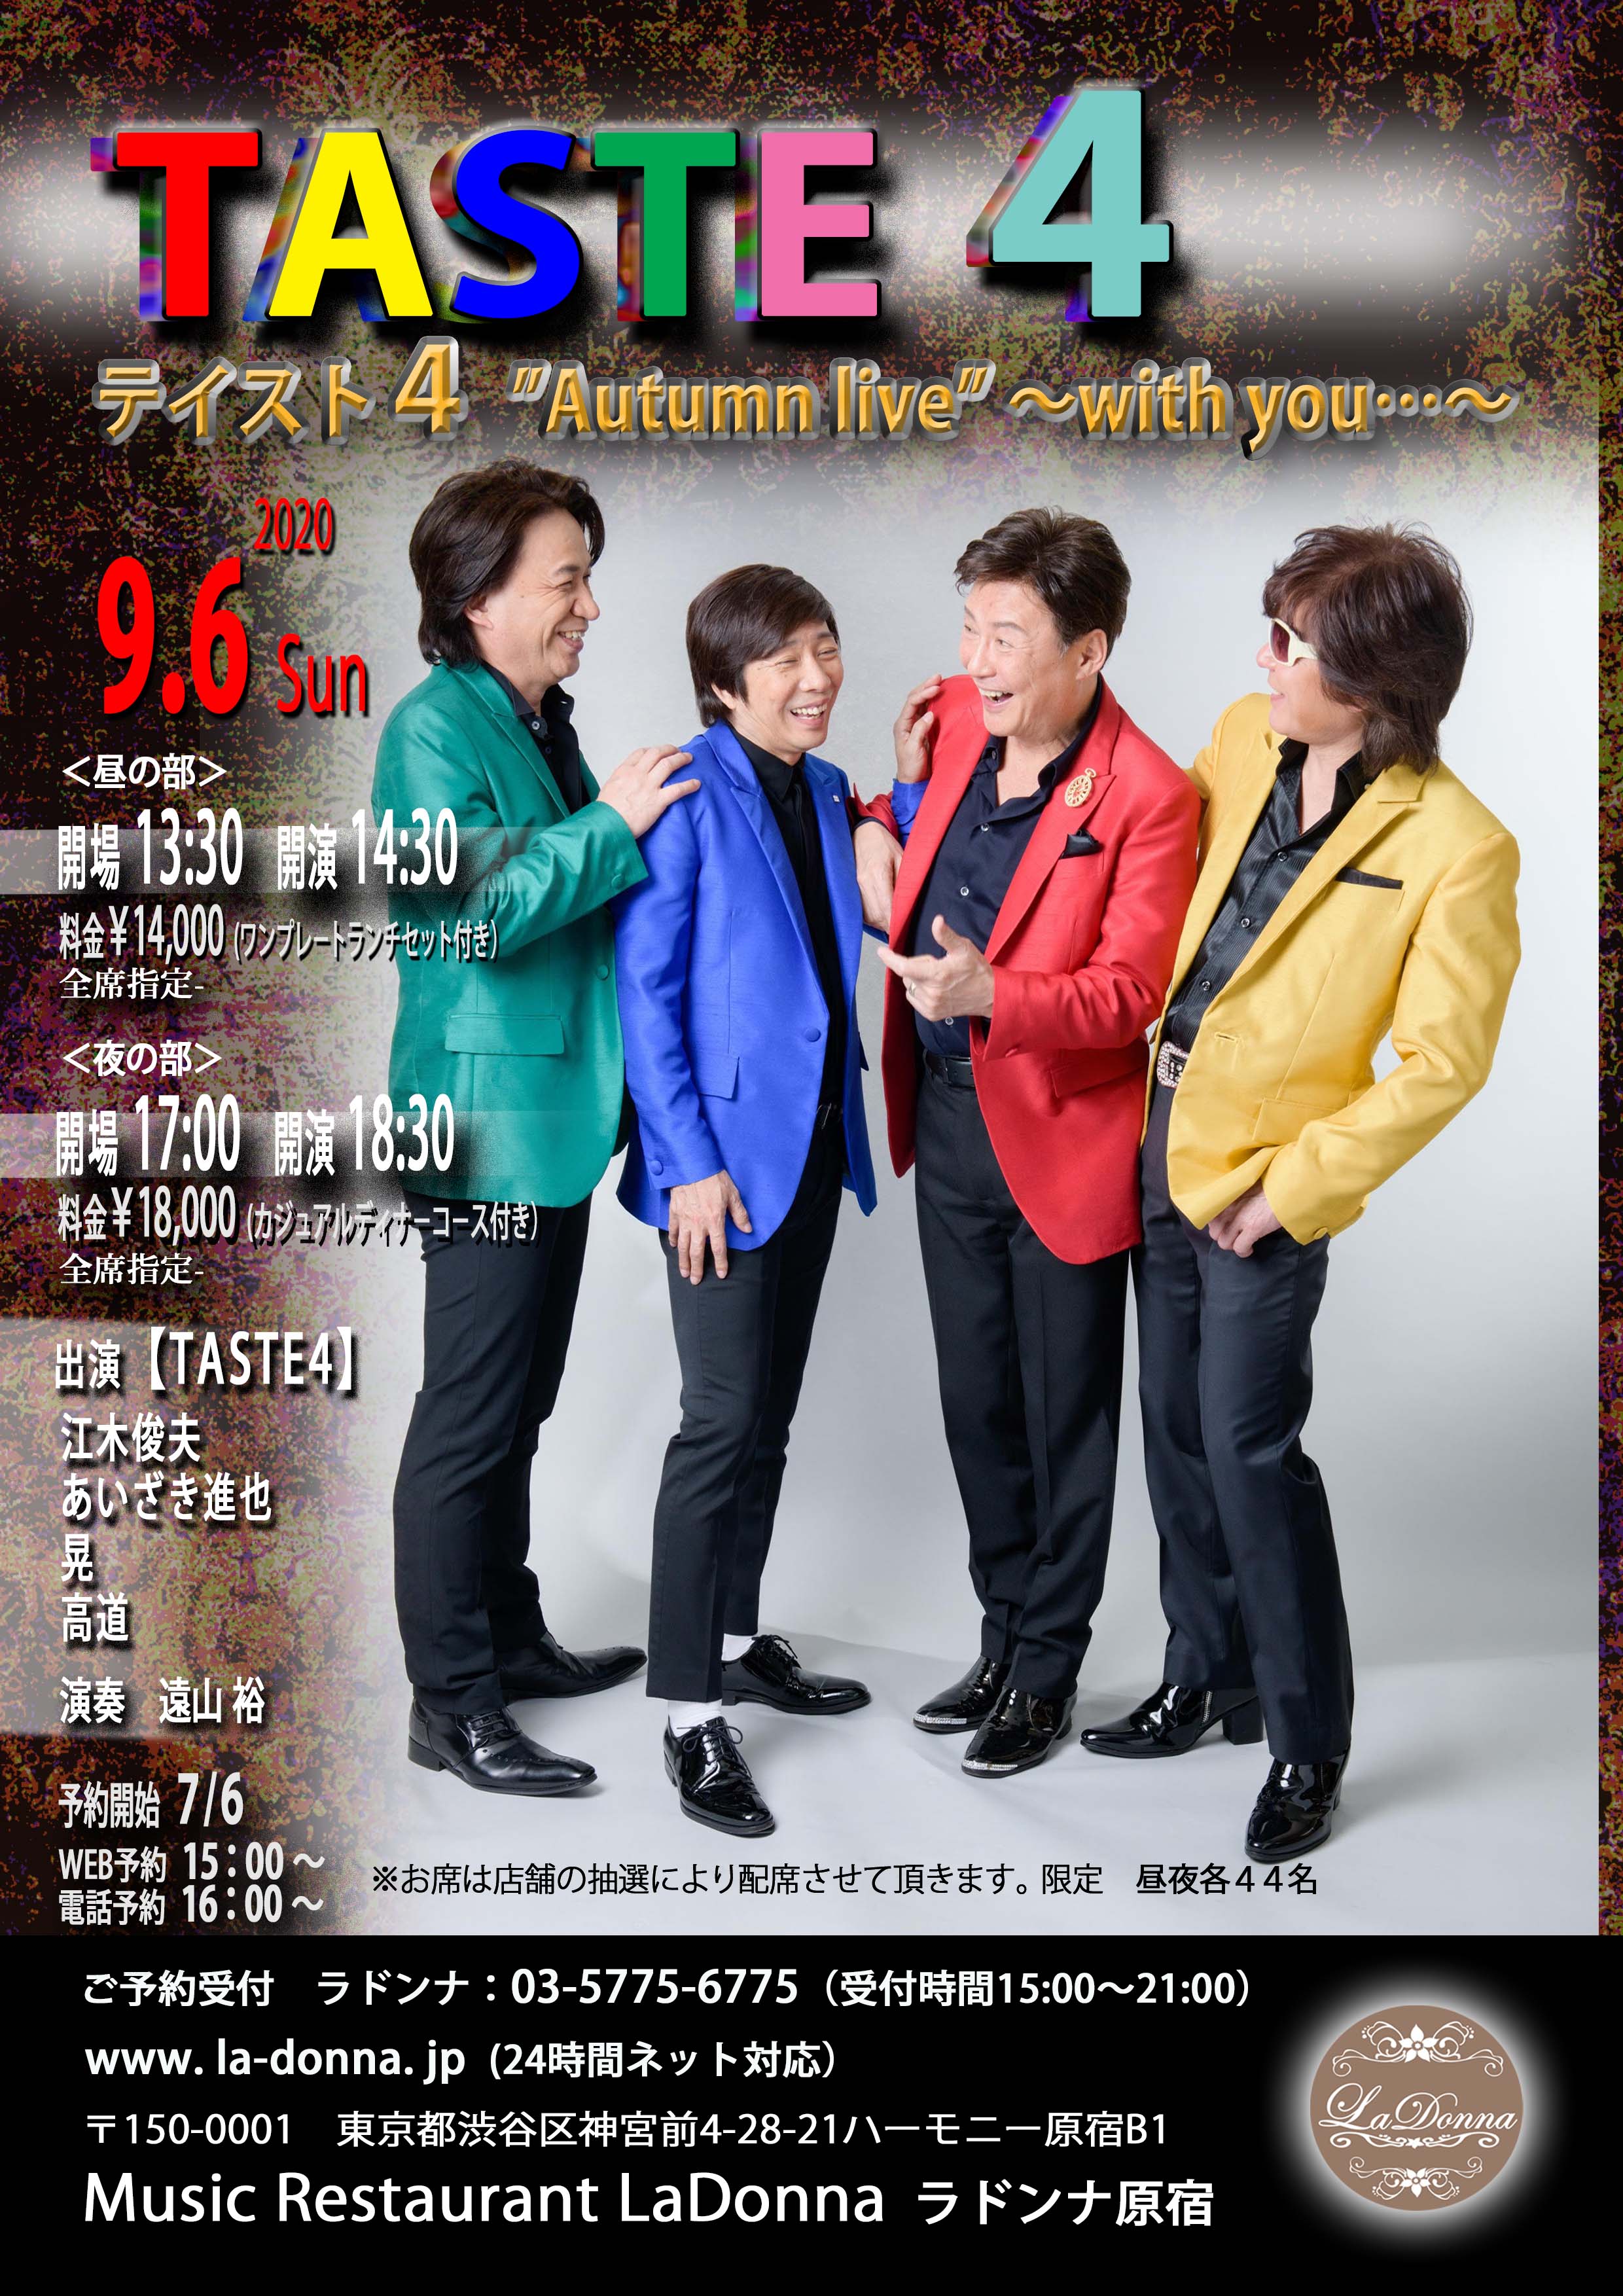 TASTE4 " Autumn live " ～ with you ・・・～